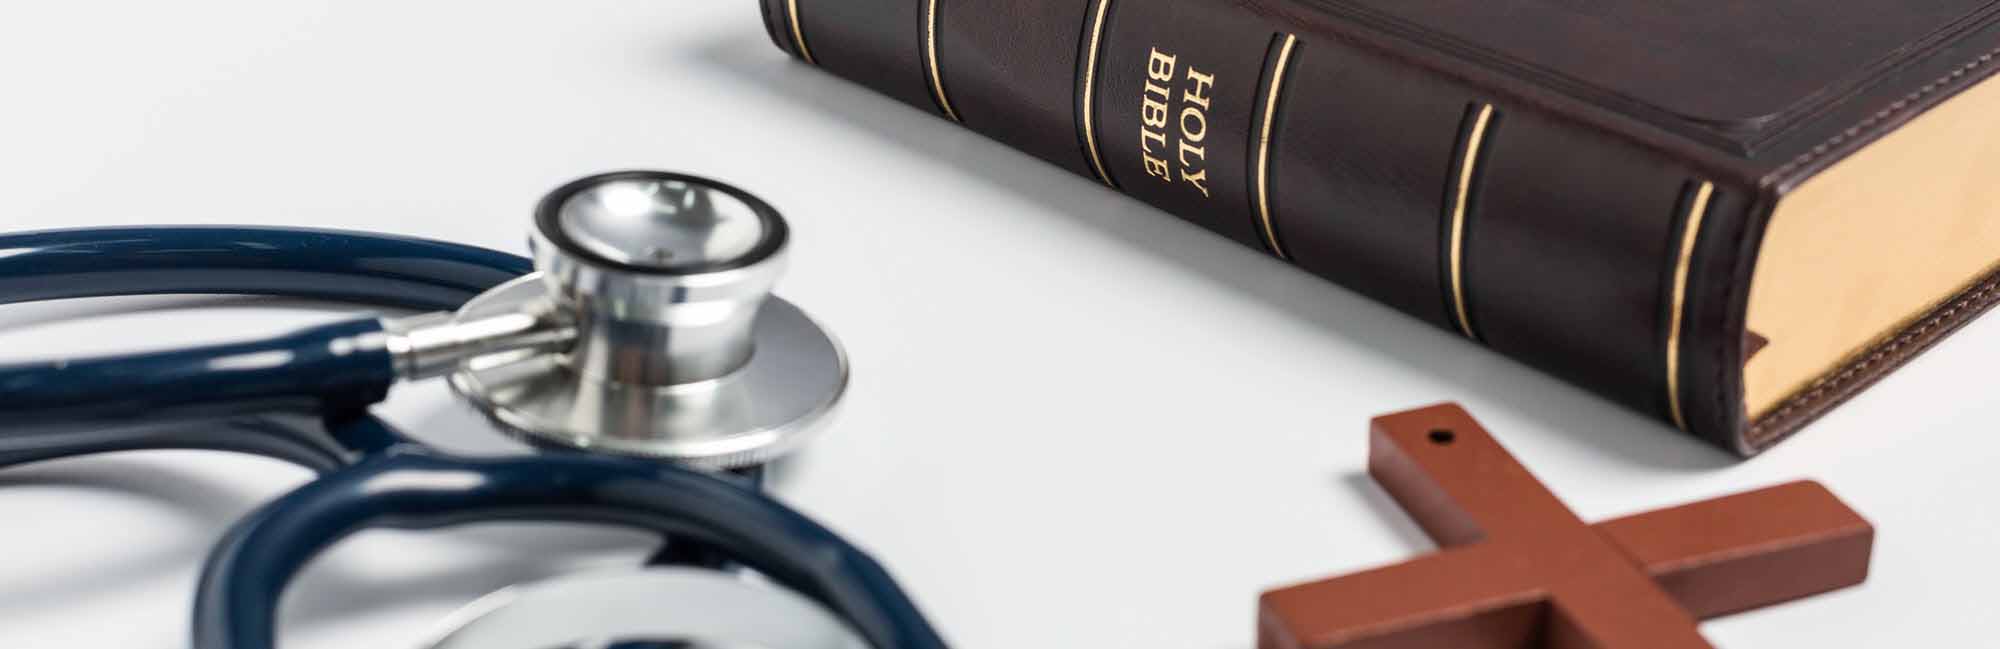 Bible, cross and stethoscope